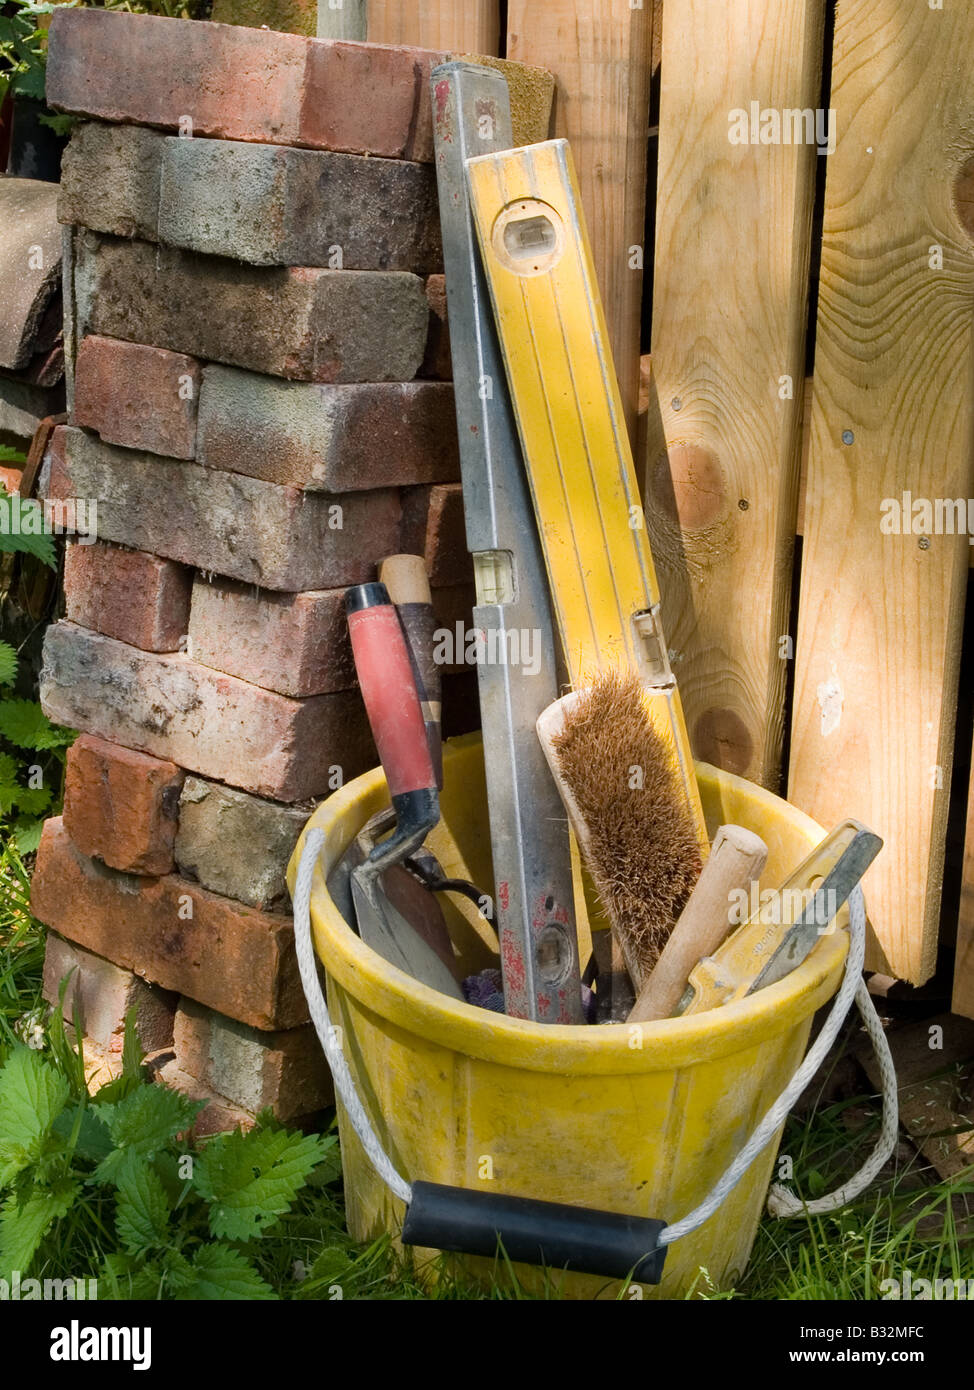 bricklayers-tools-builders-tools-stock-photo-royalty-free-image-19114352-alamy